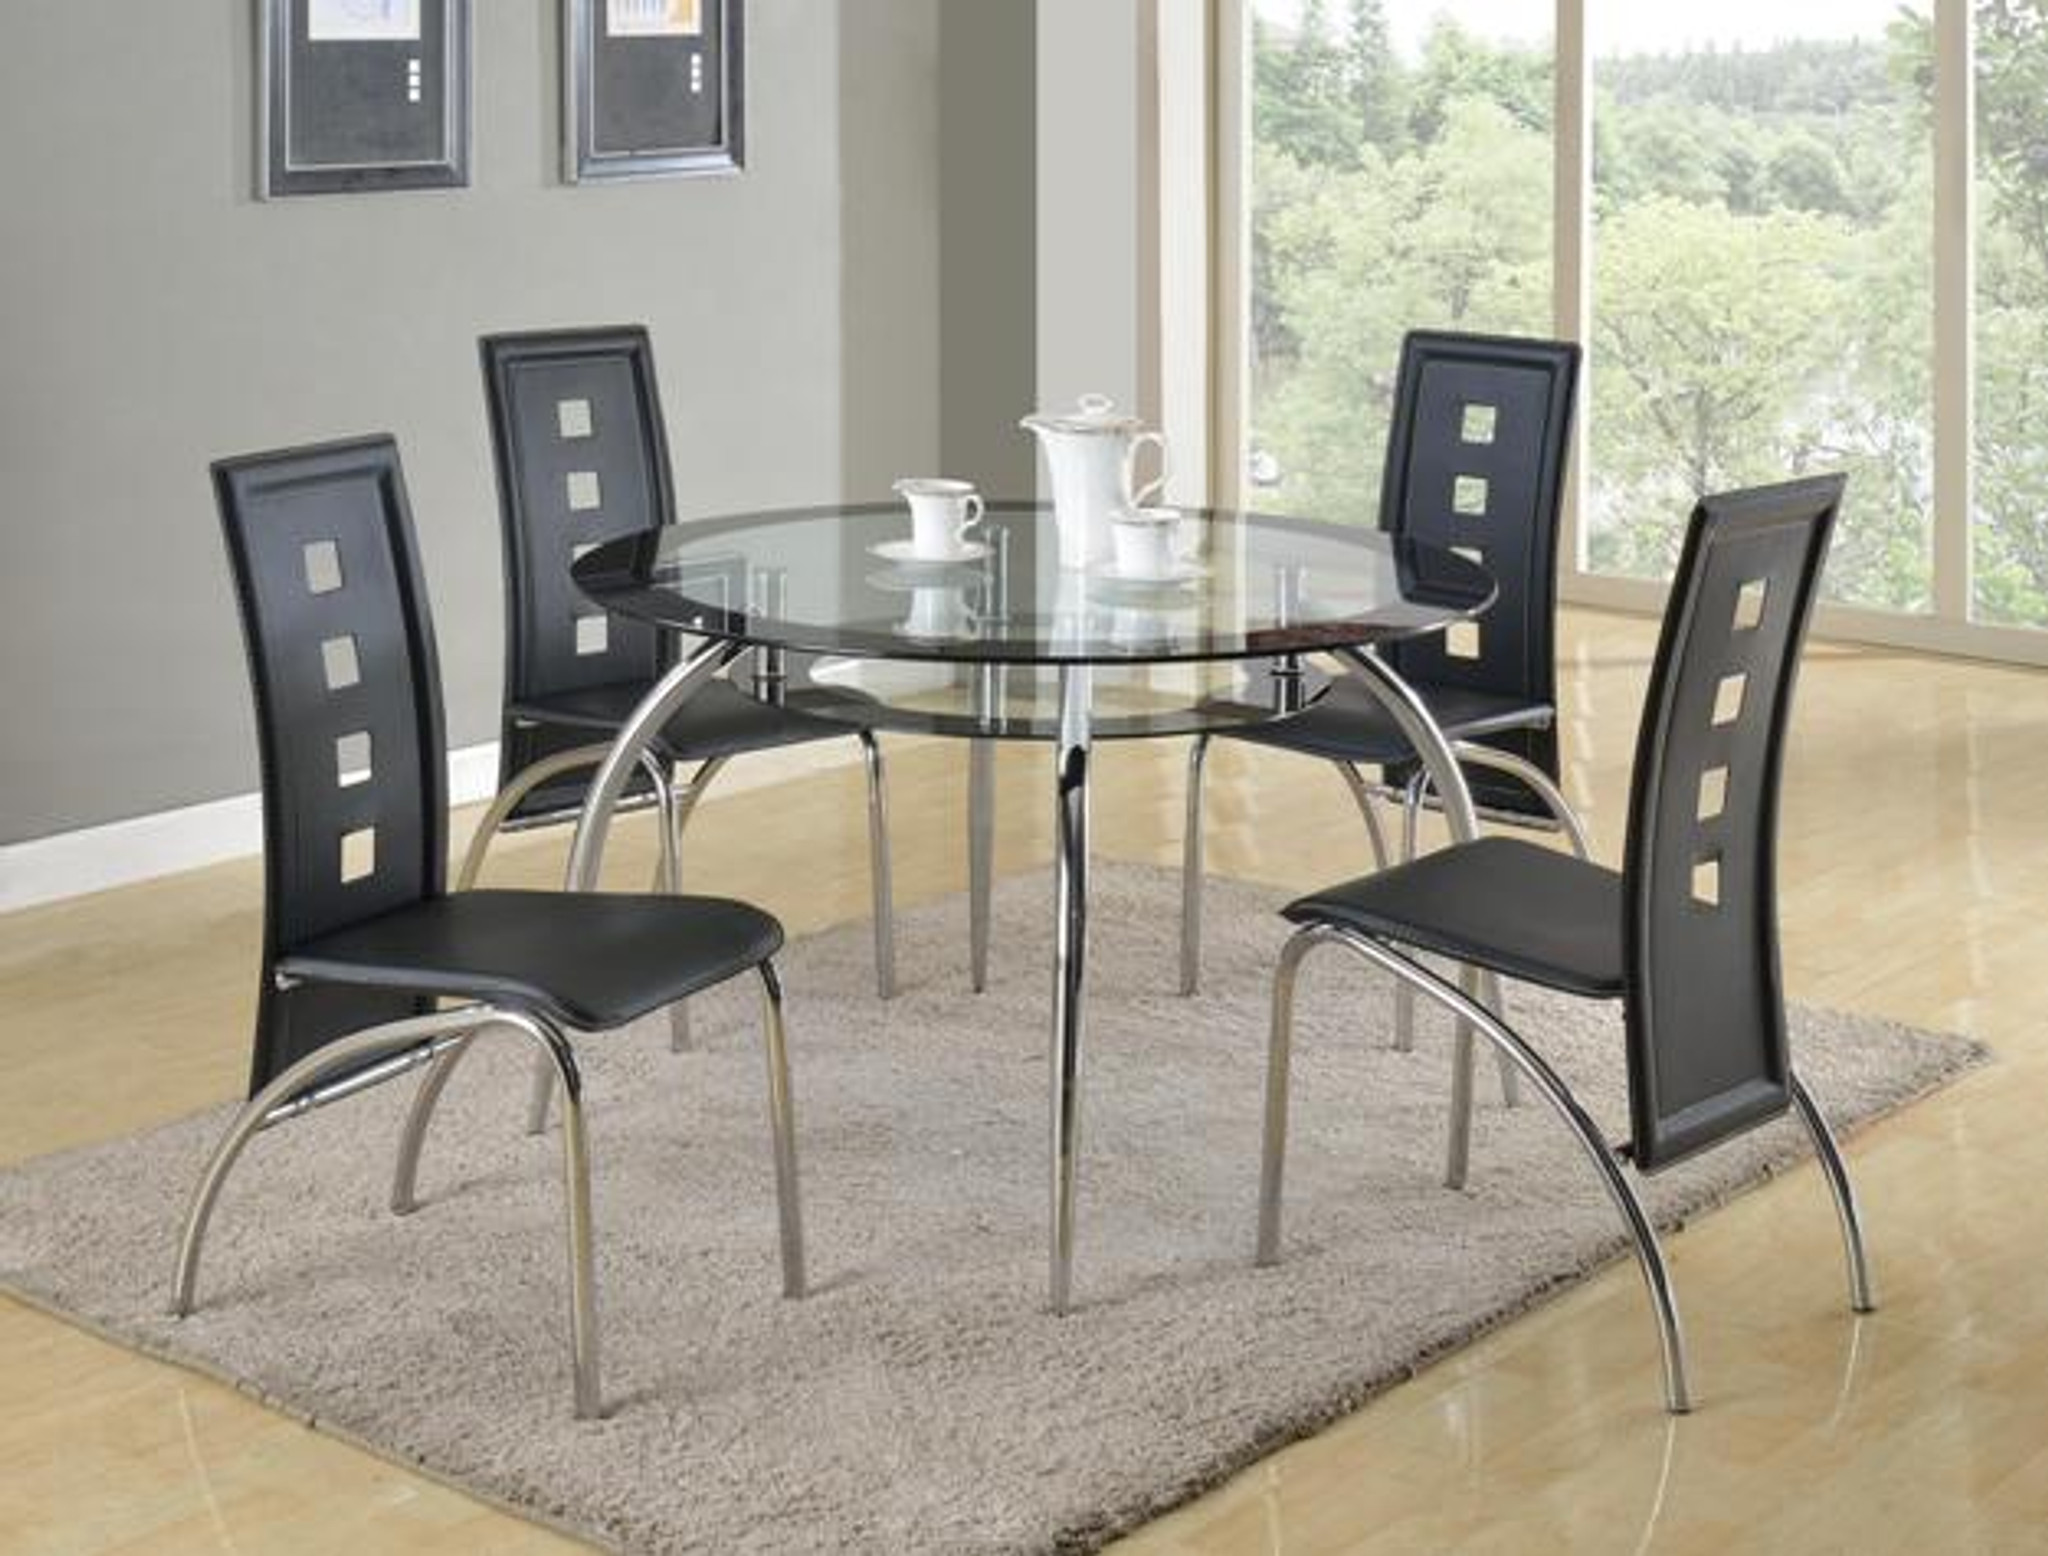 Dining Room Table Set Round Glass Kitchen Tables And Chairs Sets